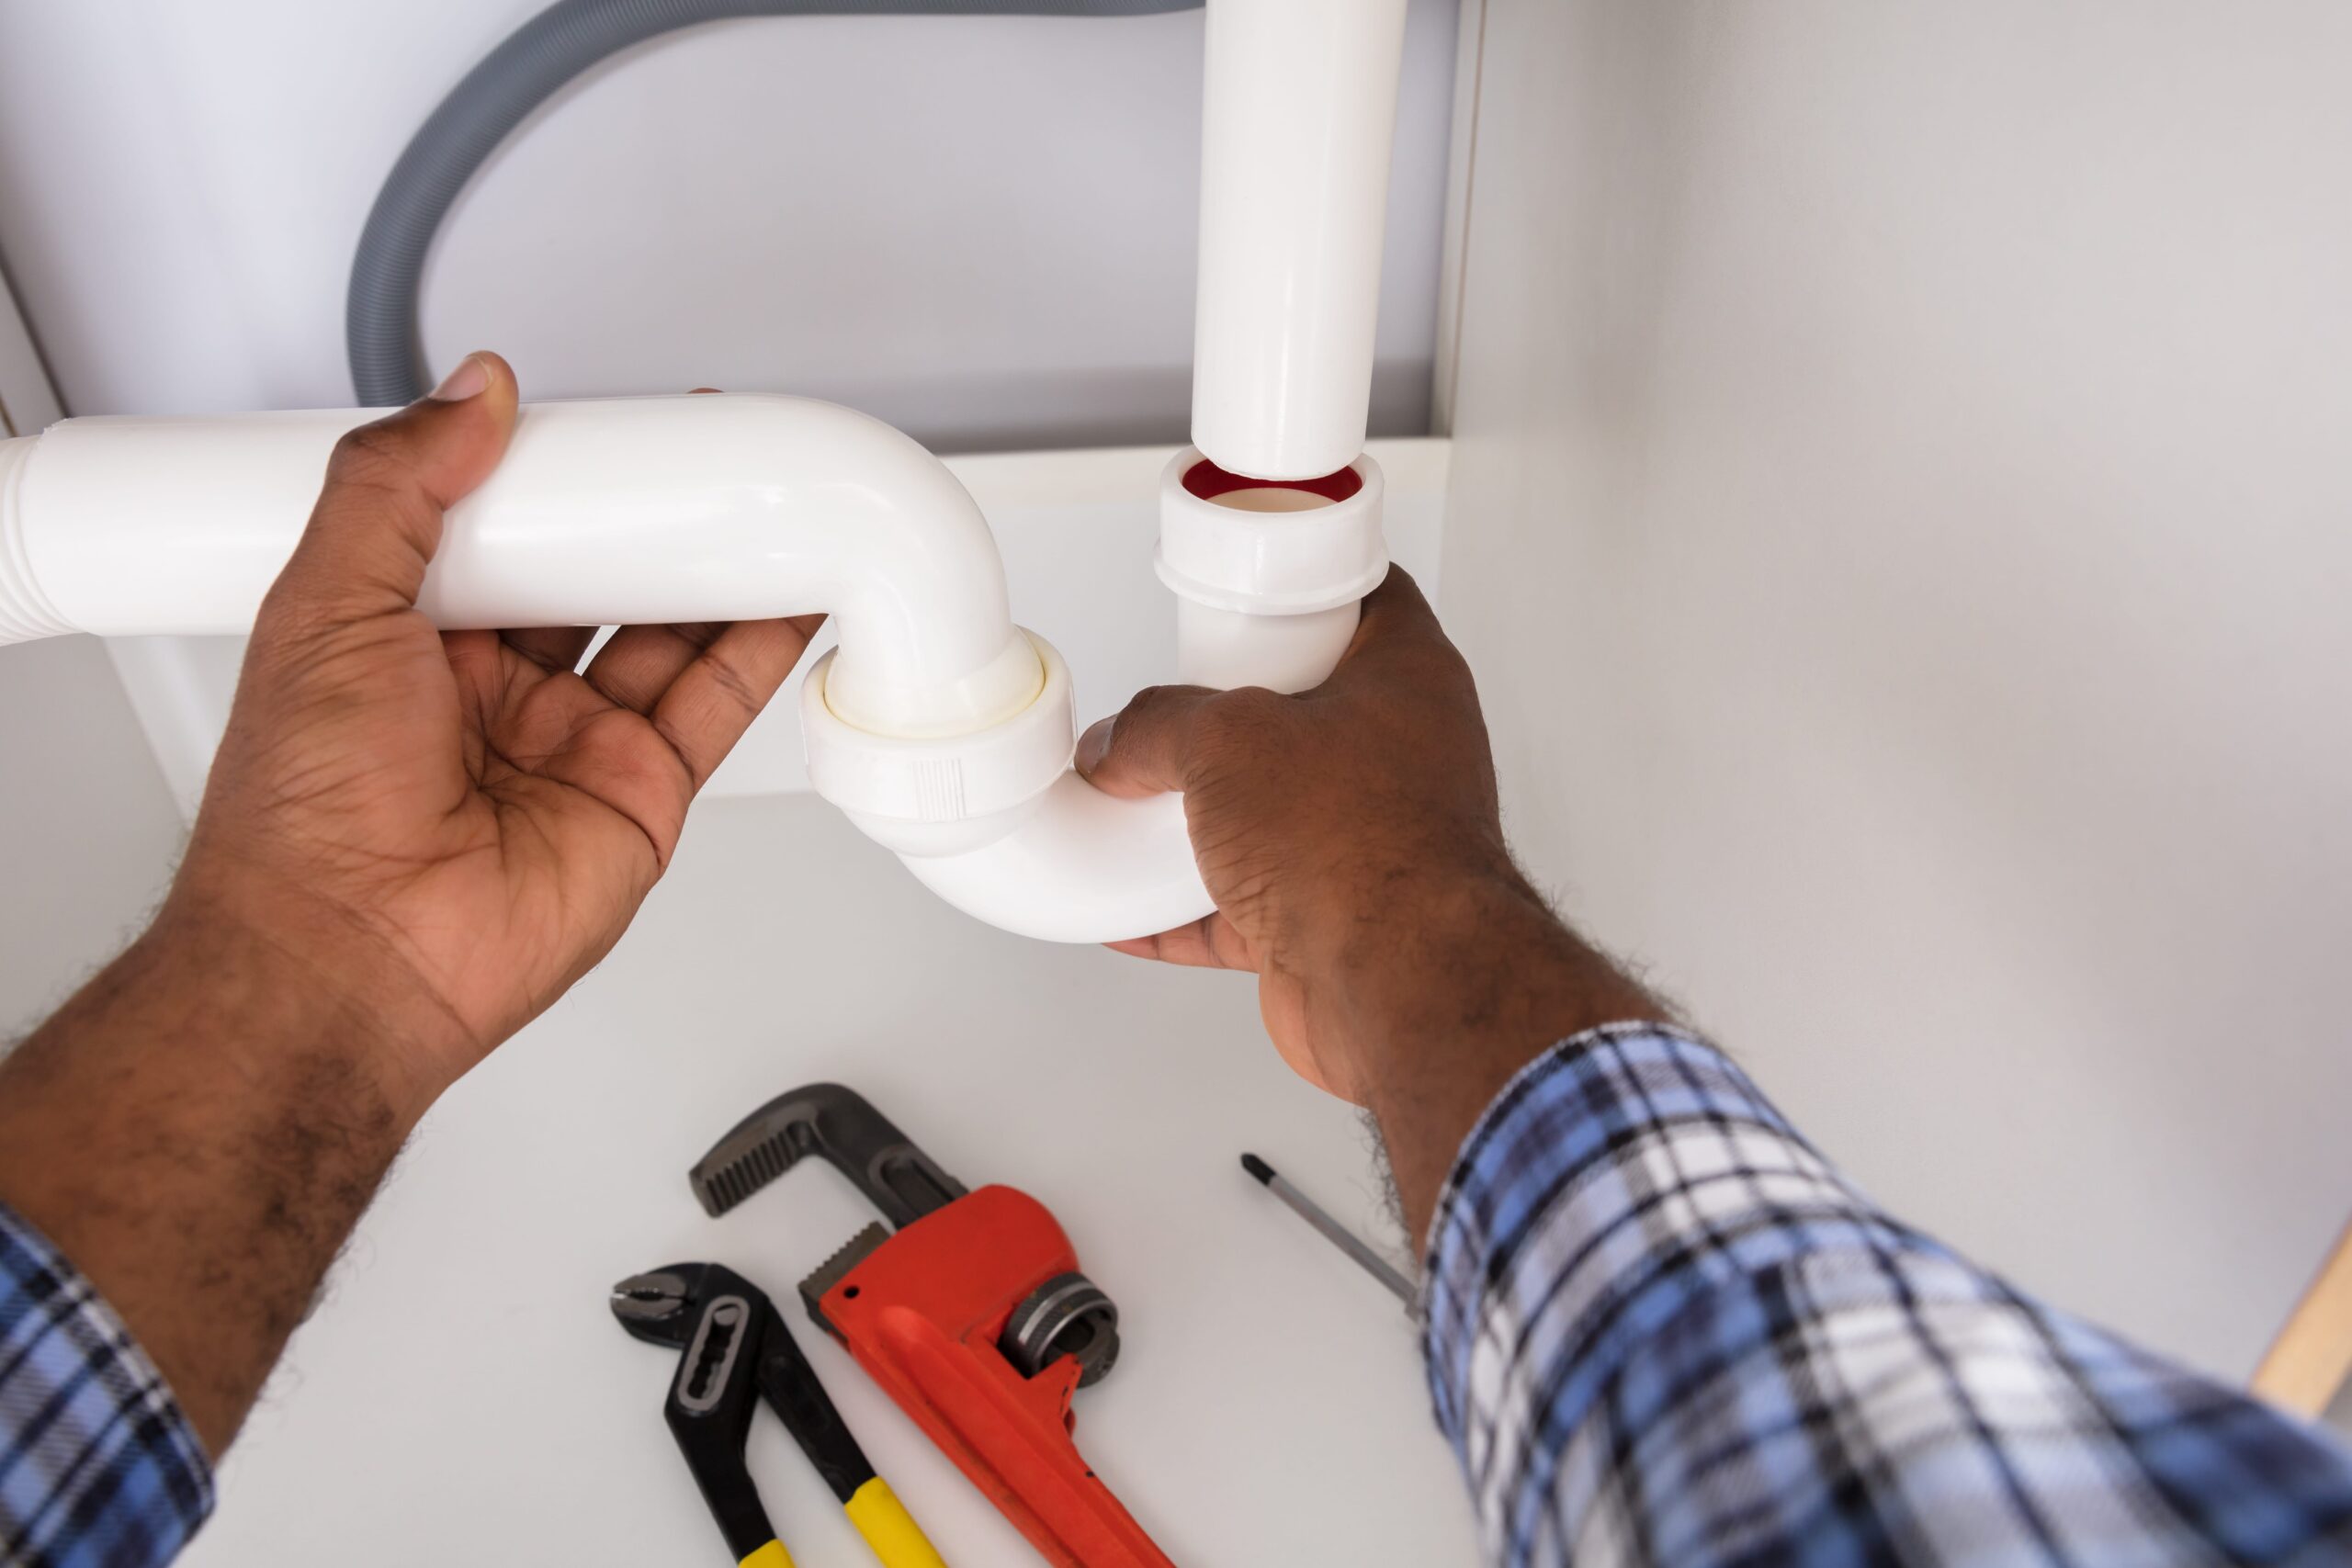 Should I Hire a Plumber to Change My Drain Trap?